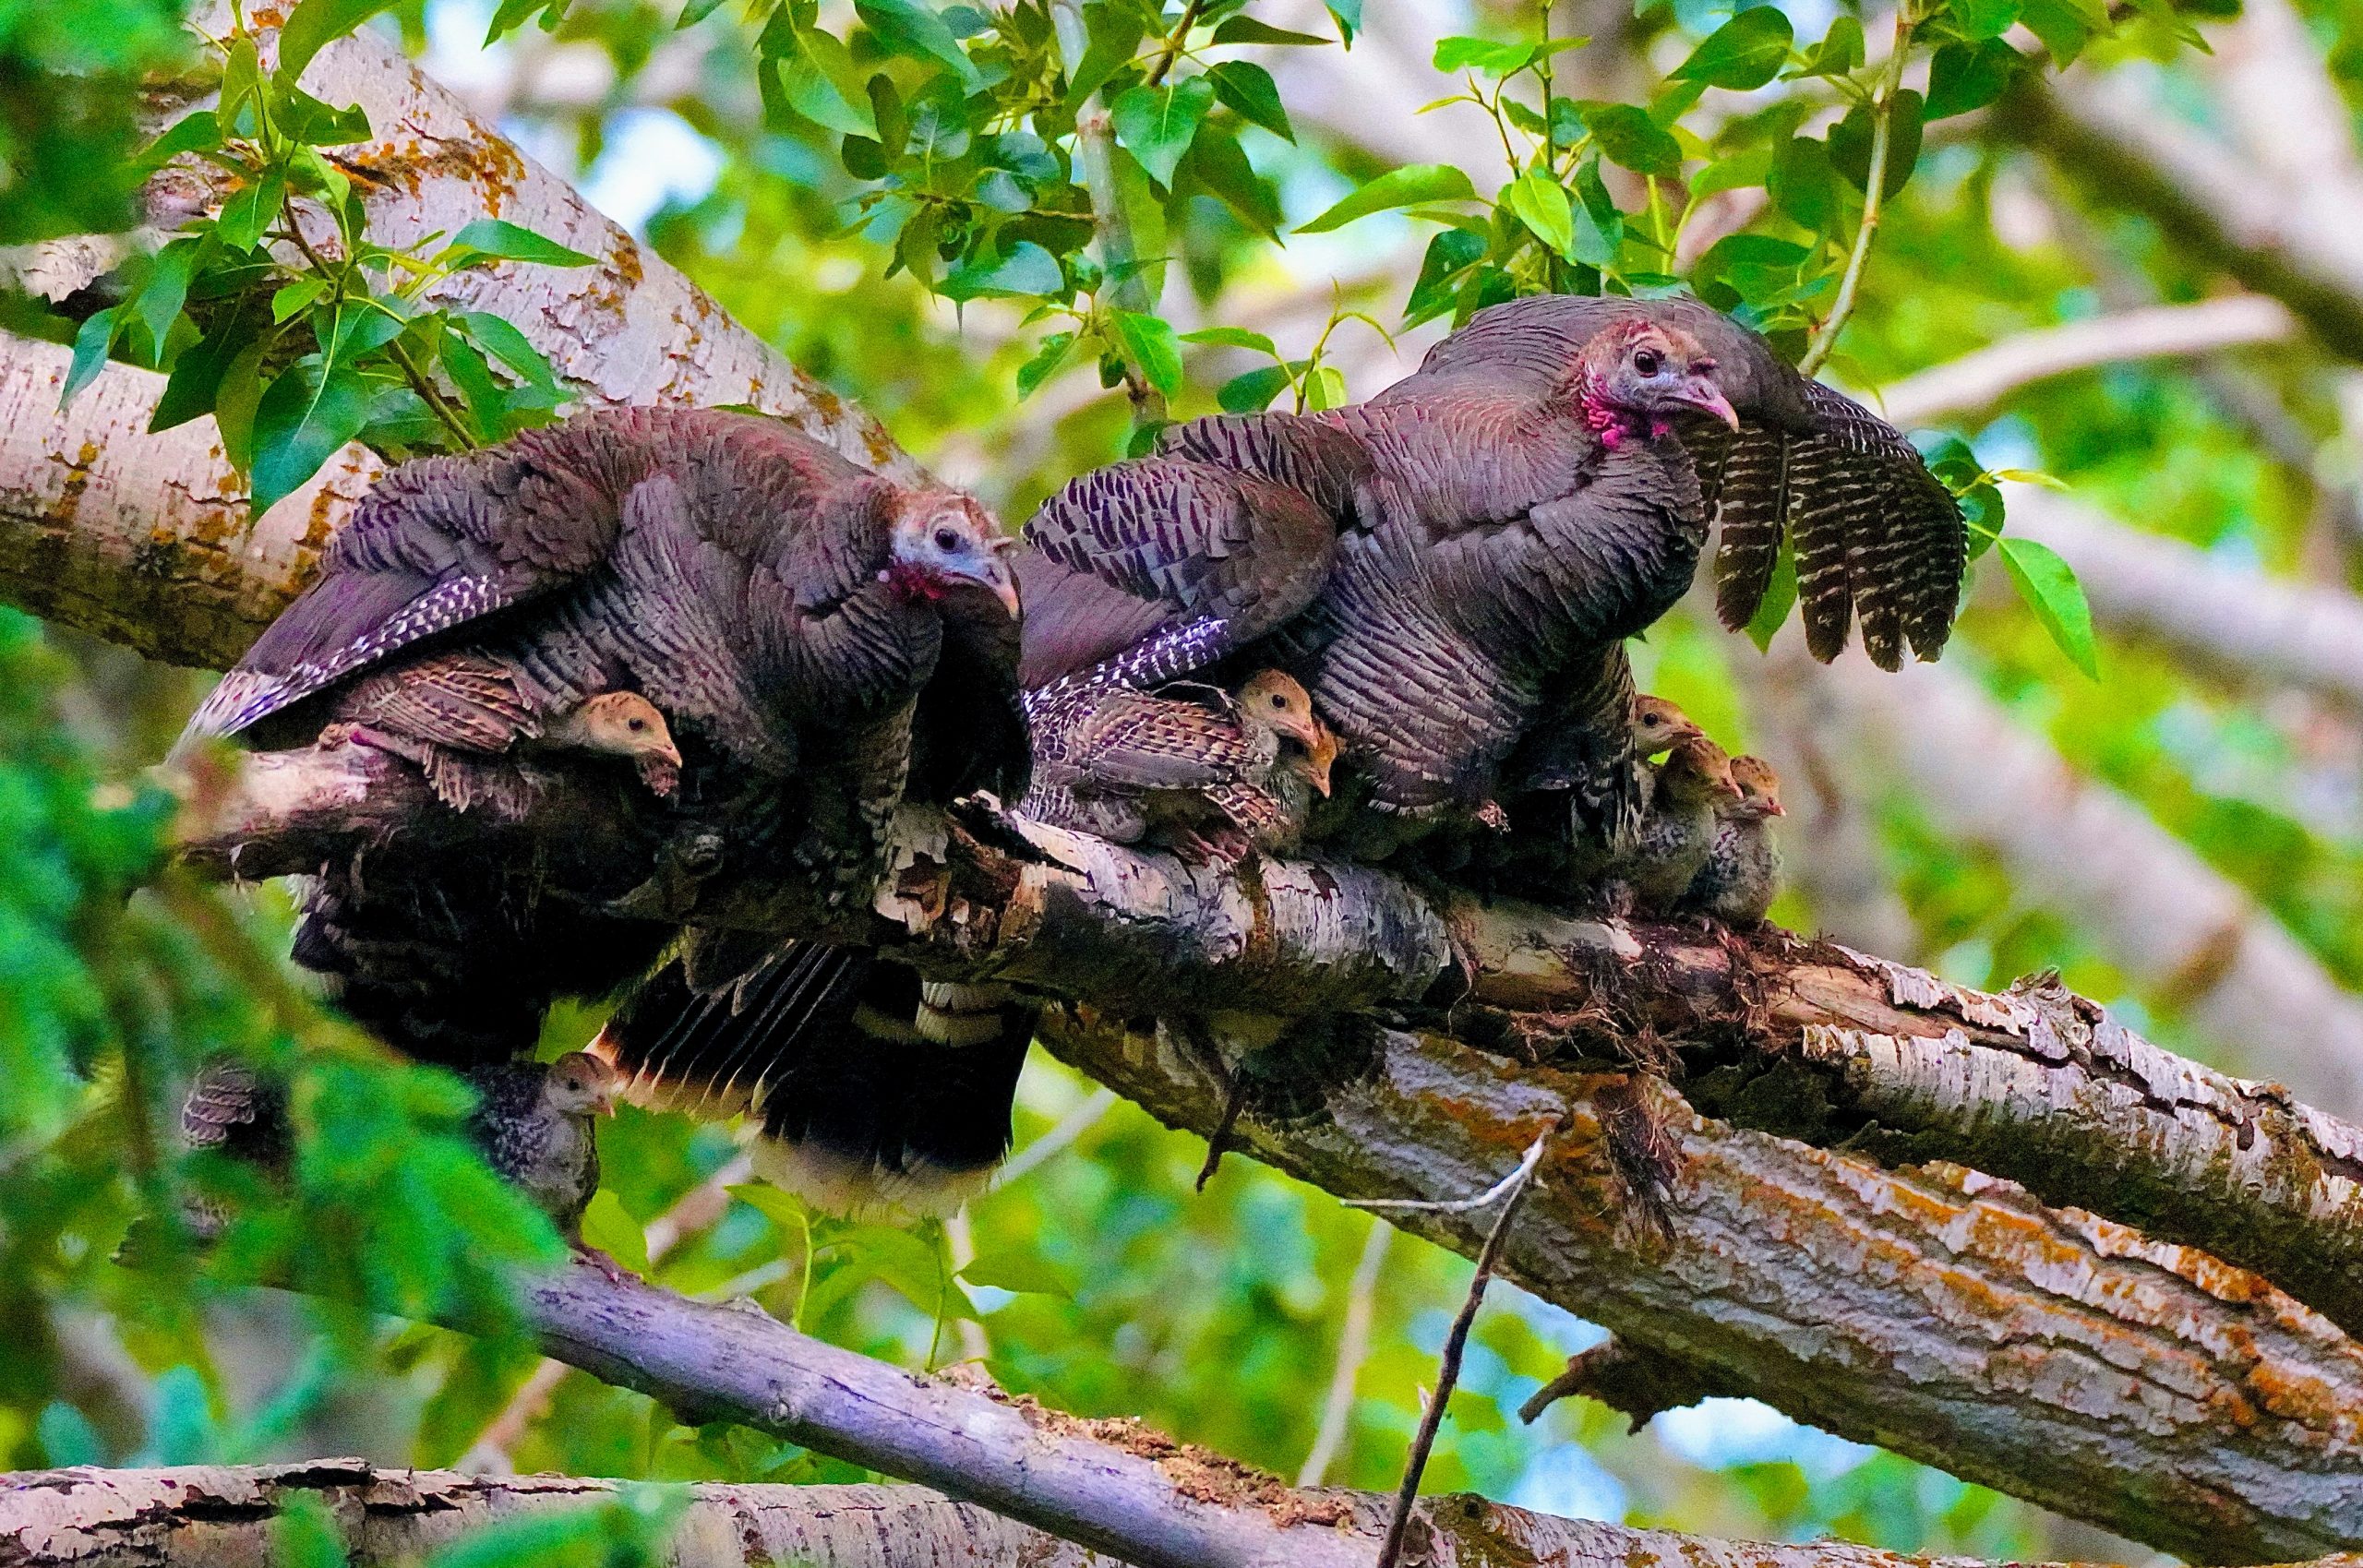 Two hens perched on a branch with poults under their wings